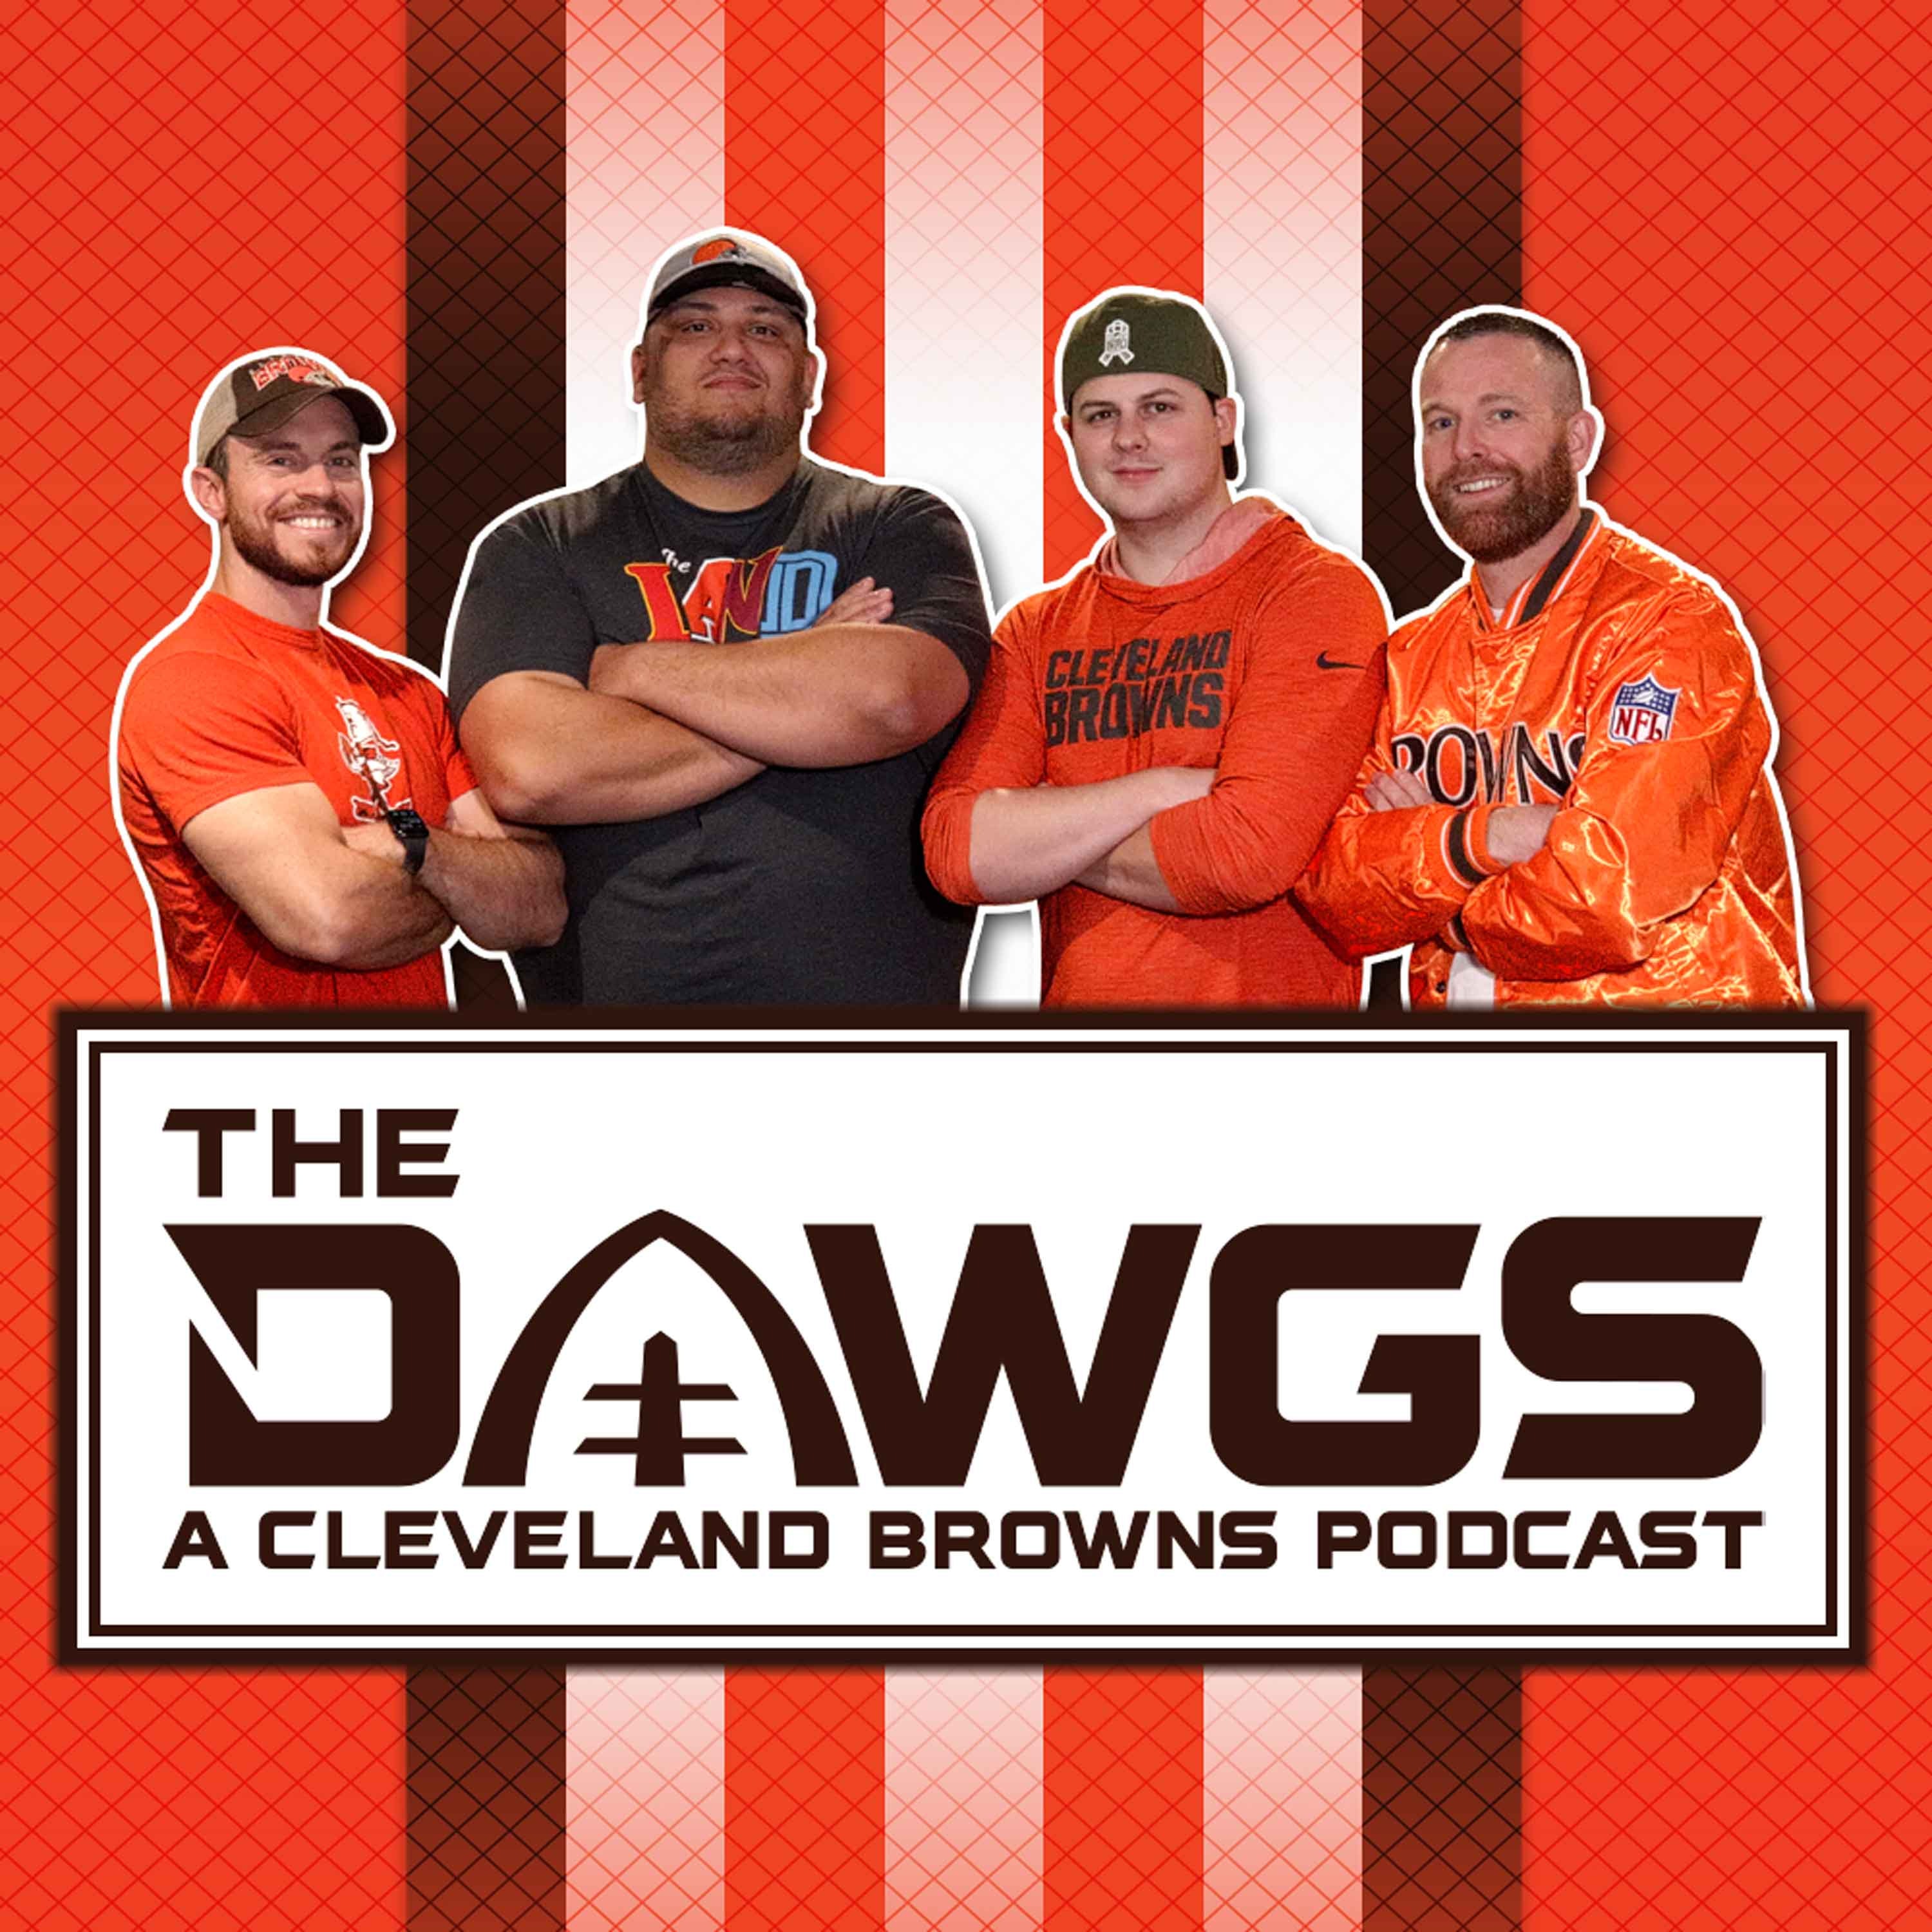 Week 4 Recap - Browns Flop Against the Falcons  | The Dawgs - A Cleveland Browns Podcast - October 4, 2022